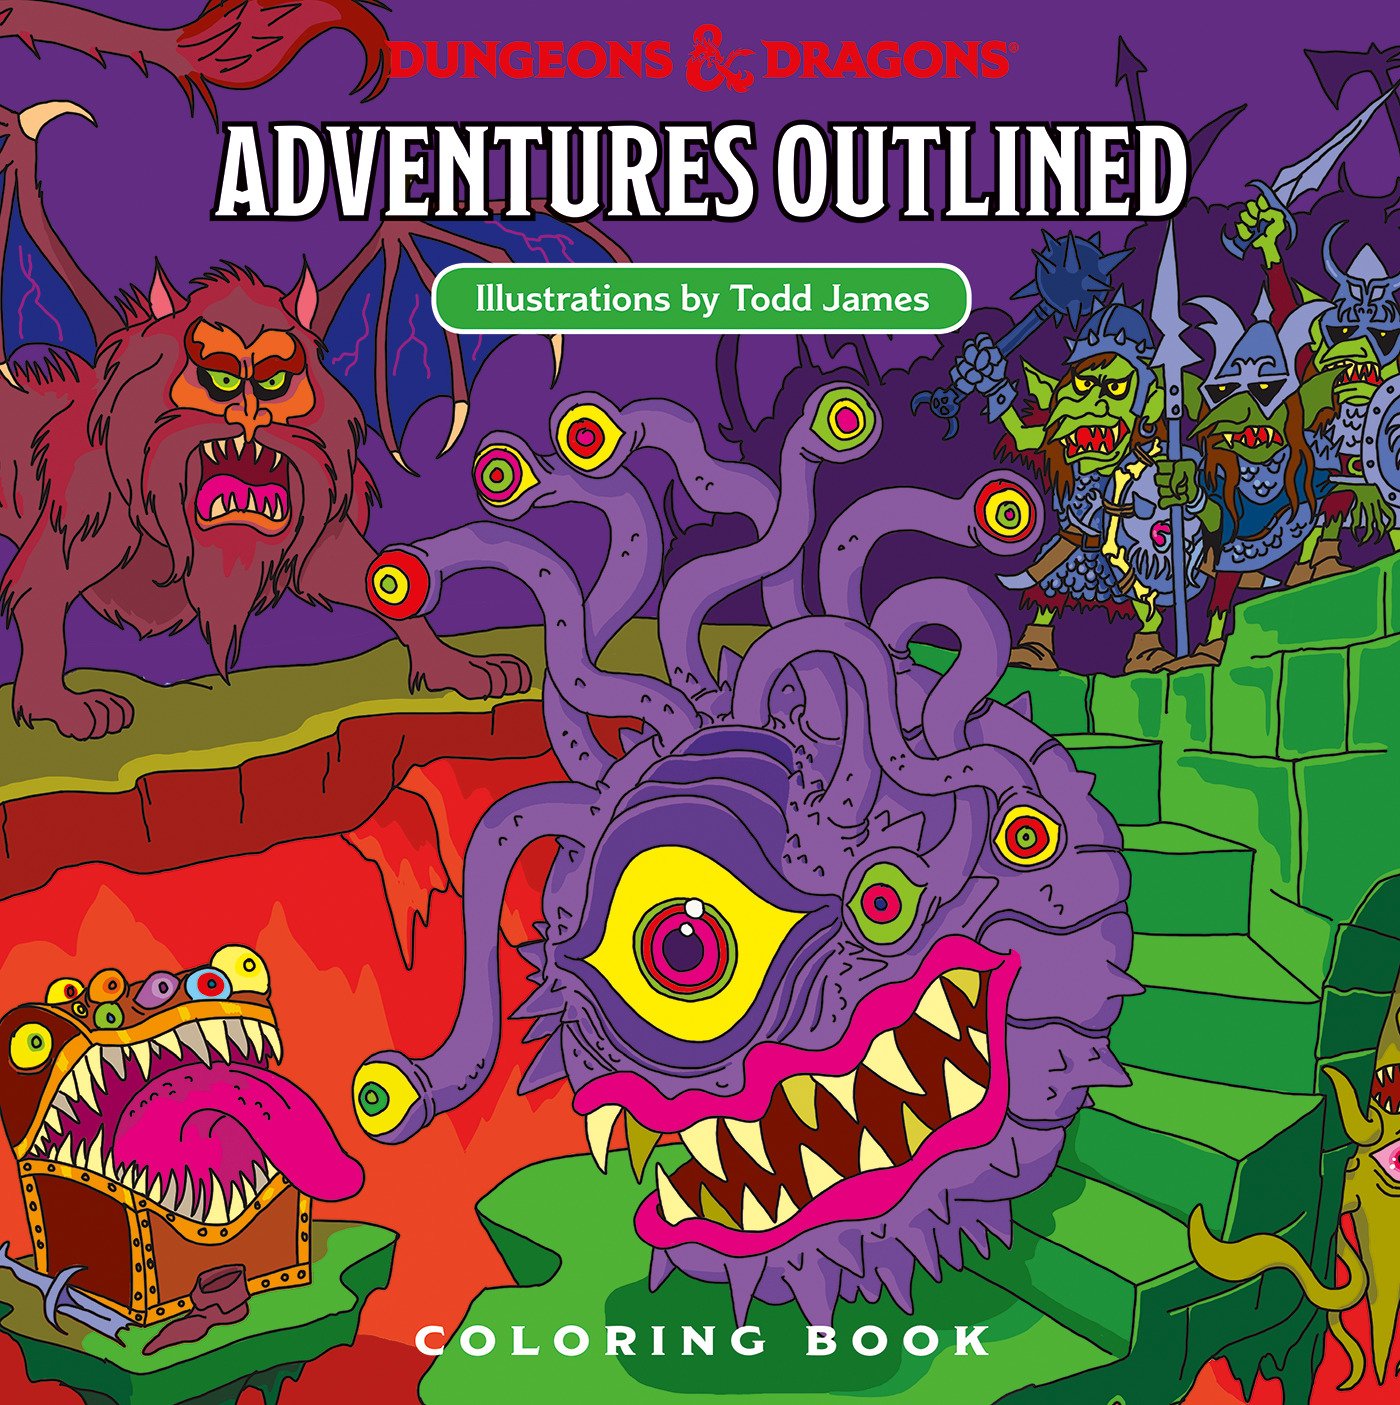 Dungeons & Dragons Adventures Outlined - Coloring Book